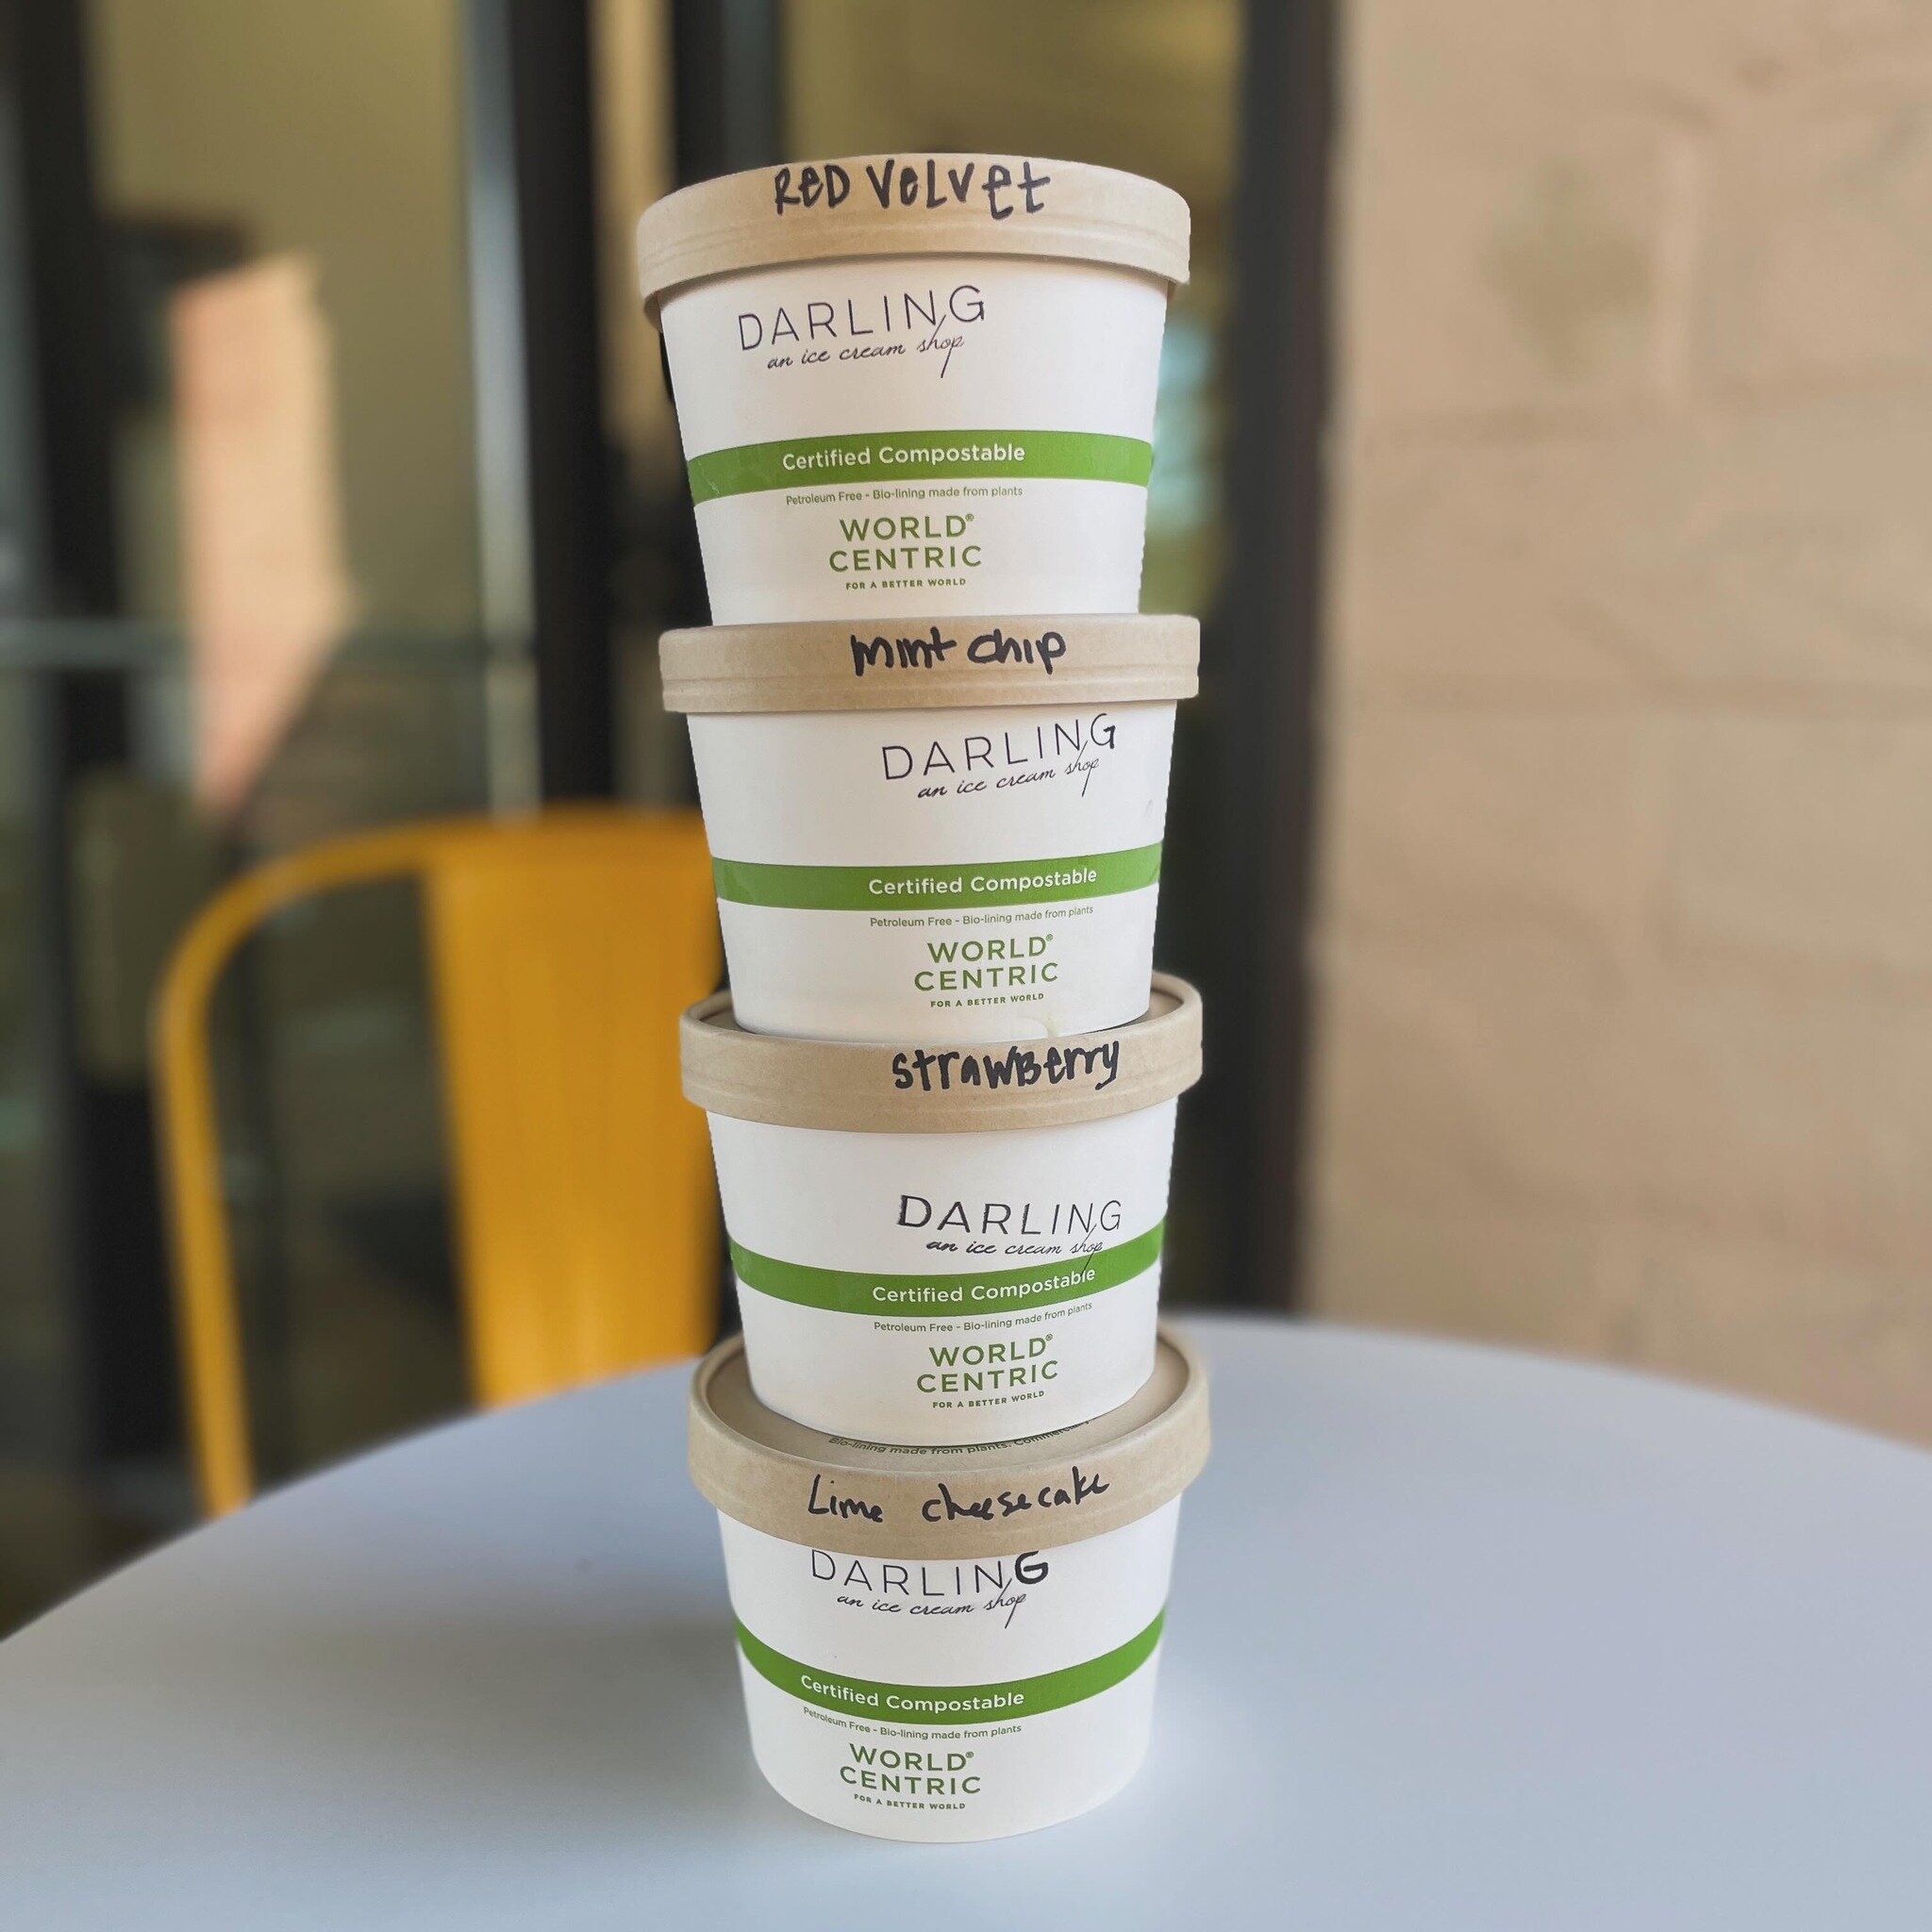 What would be in your pint stack? Come stock up before the weekend! 

It&rsquo;s our last week with February flavors, March flavors launch next Wednesday!

#icecreampints #darlingsonom